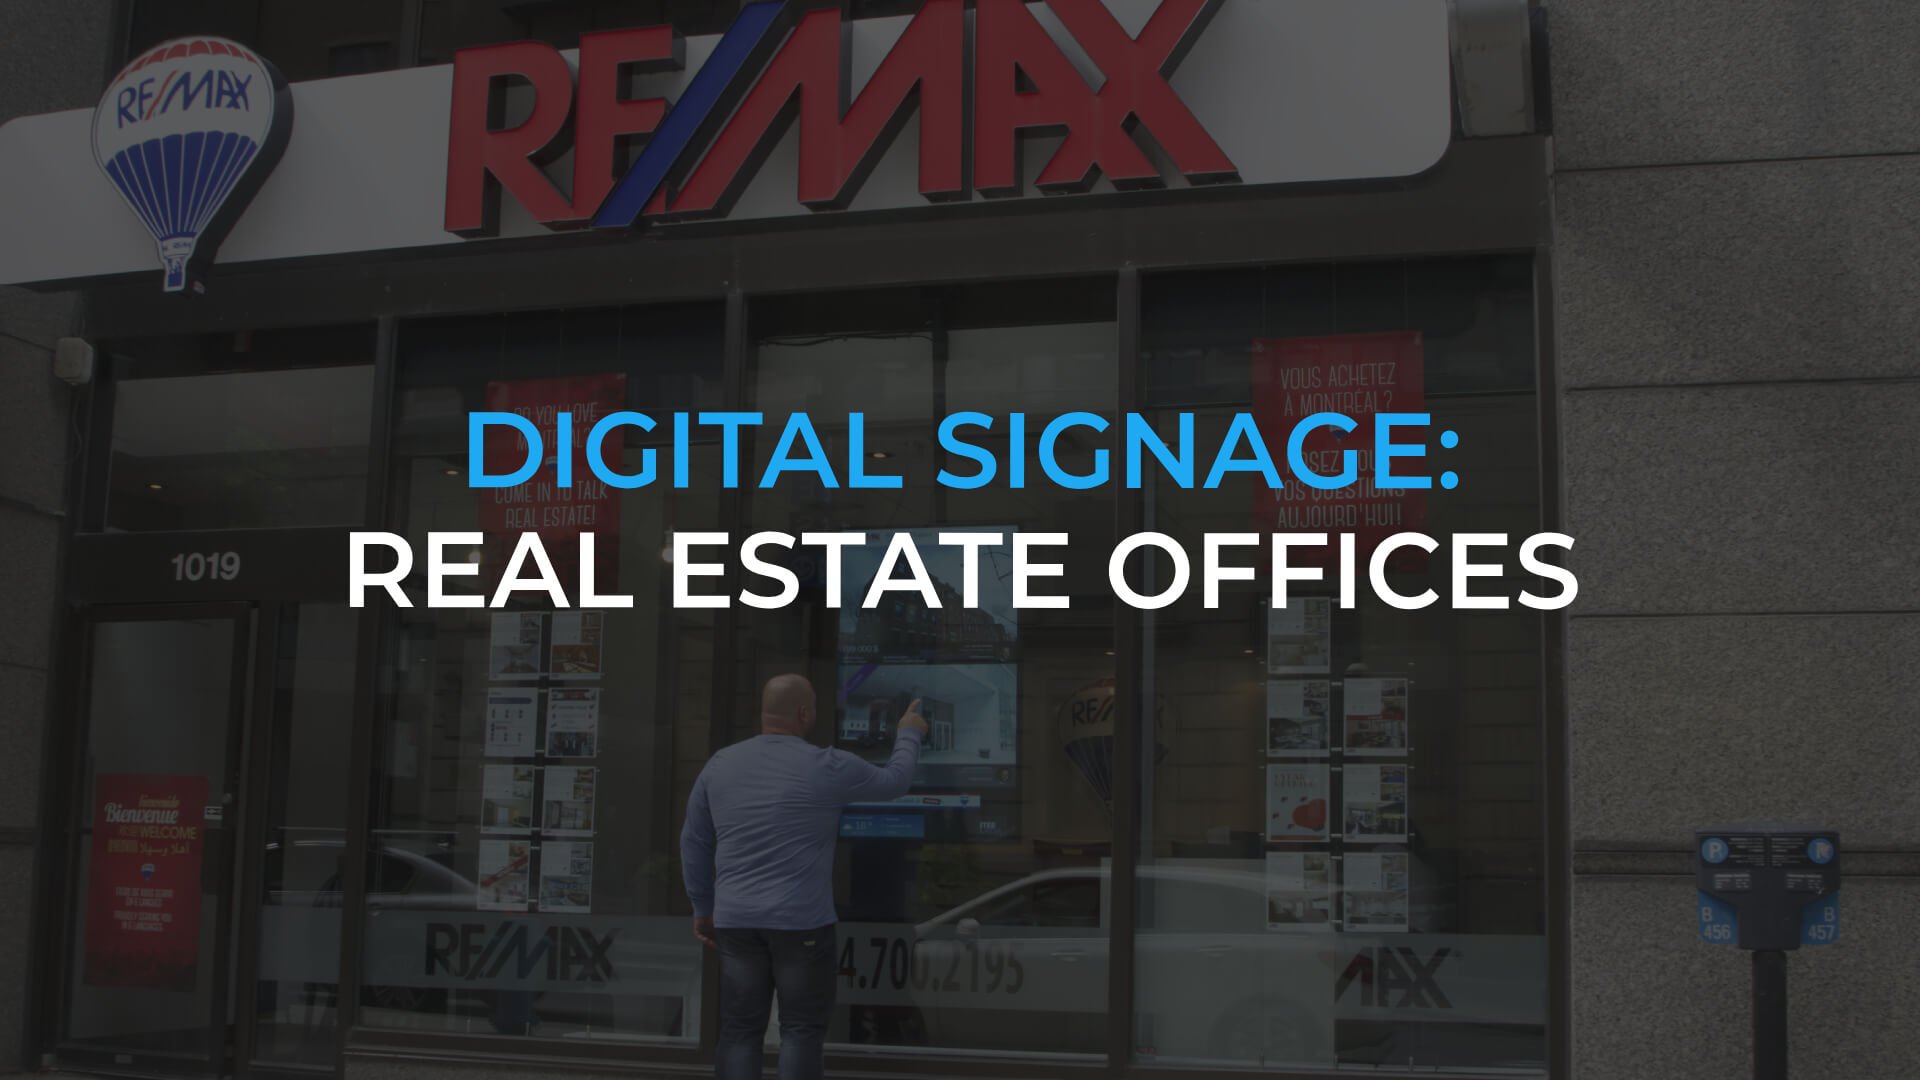 Using Digital Signage: Real Estate Offices